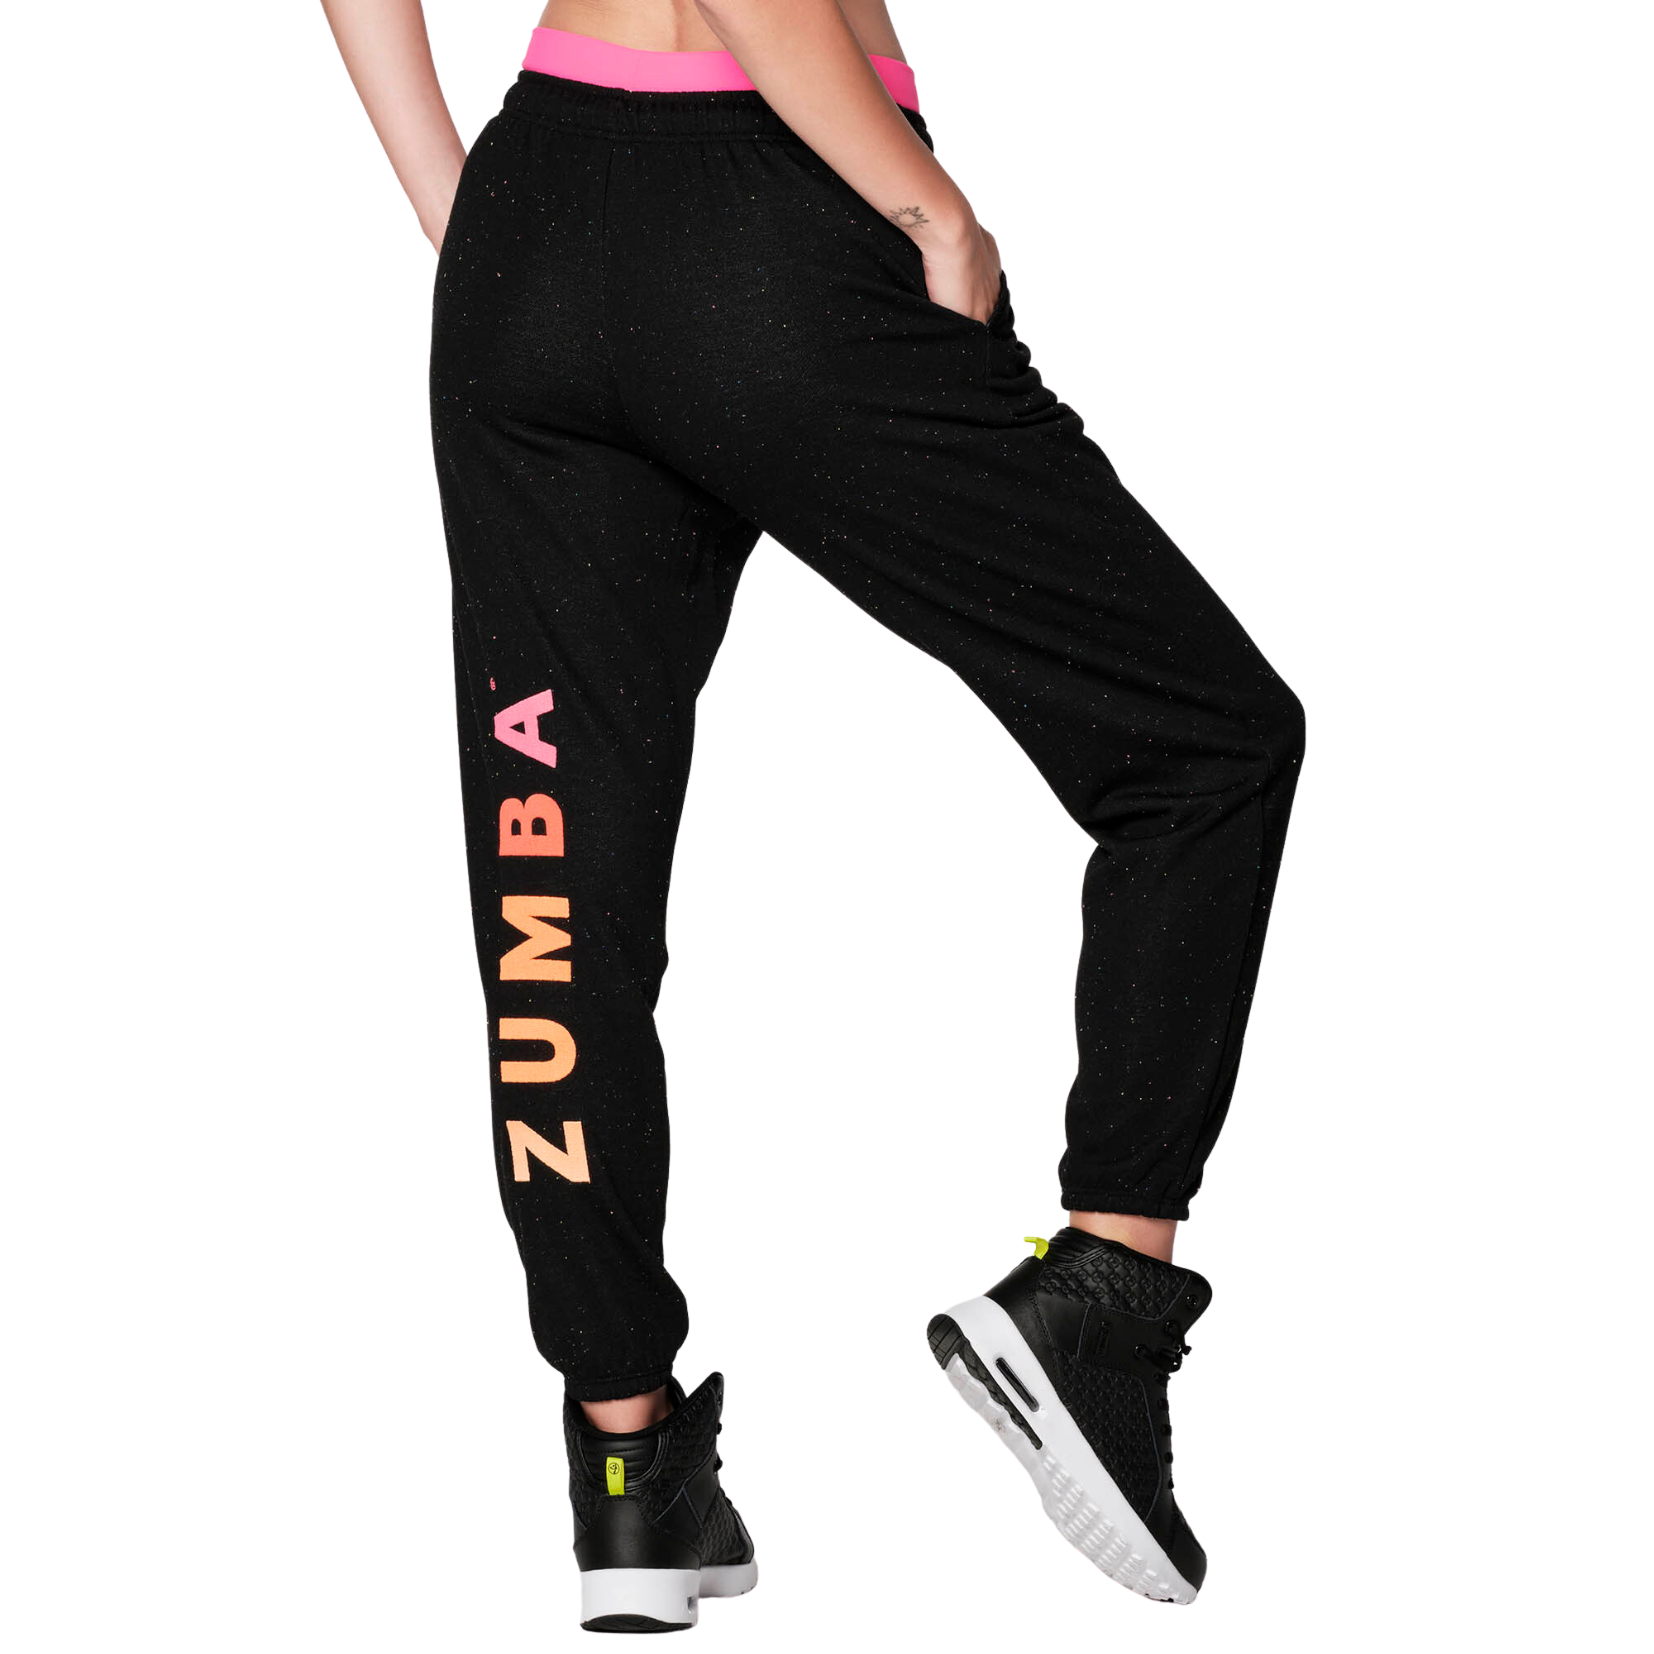 Zumba Move Double Waistband Sweatpants (Special Order)